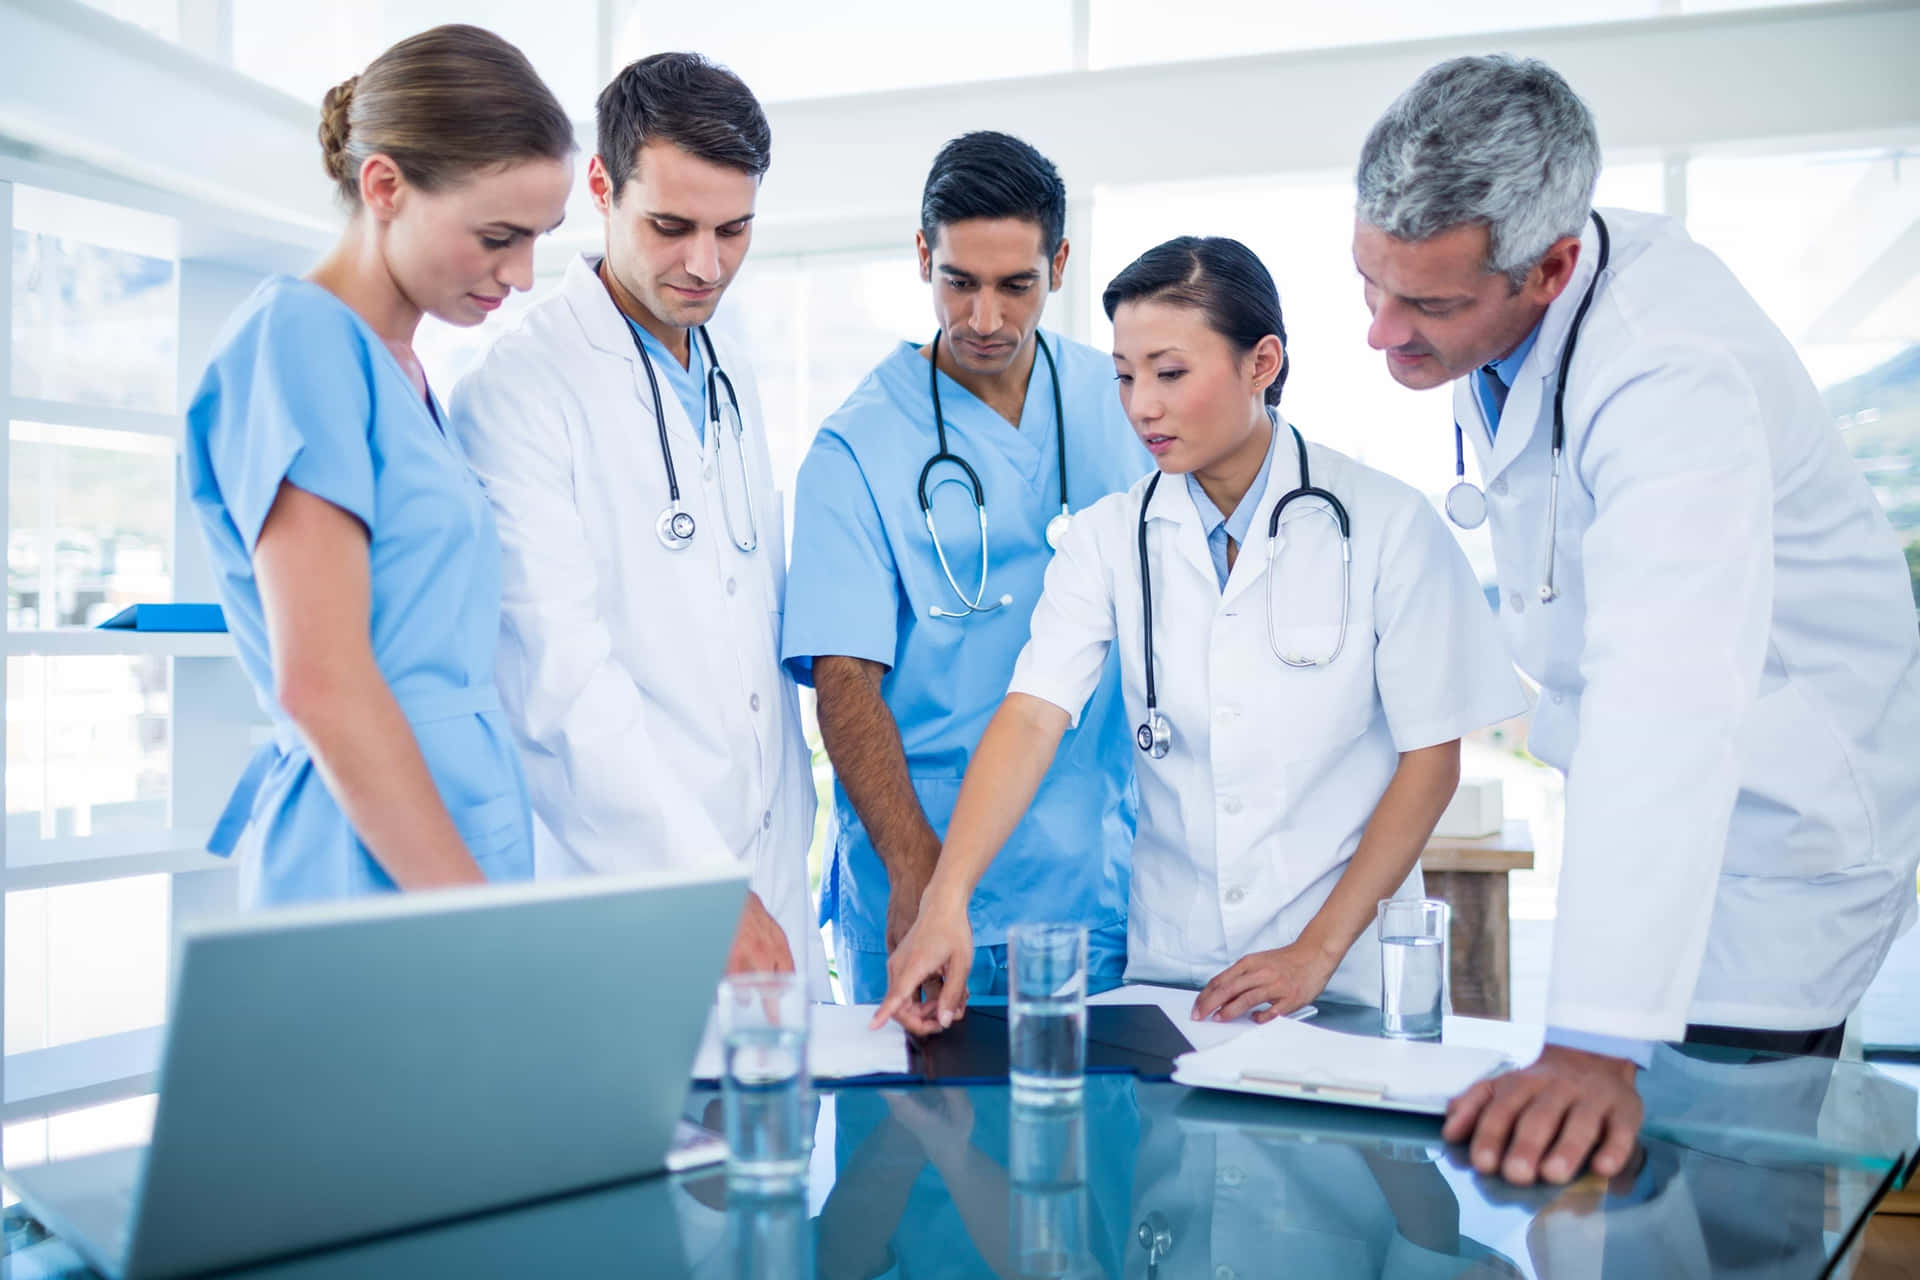 A Group Of Doctors Looking At A Laptop